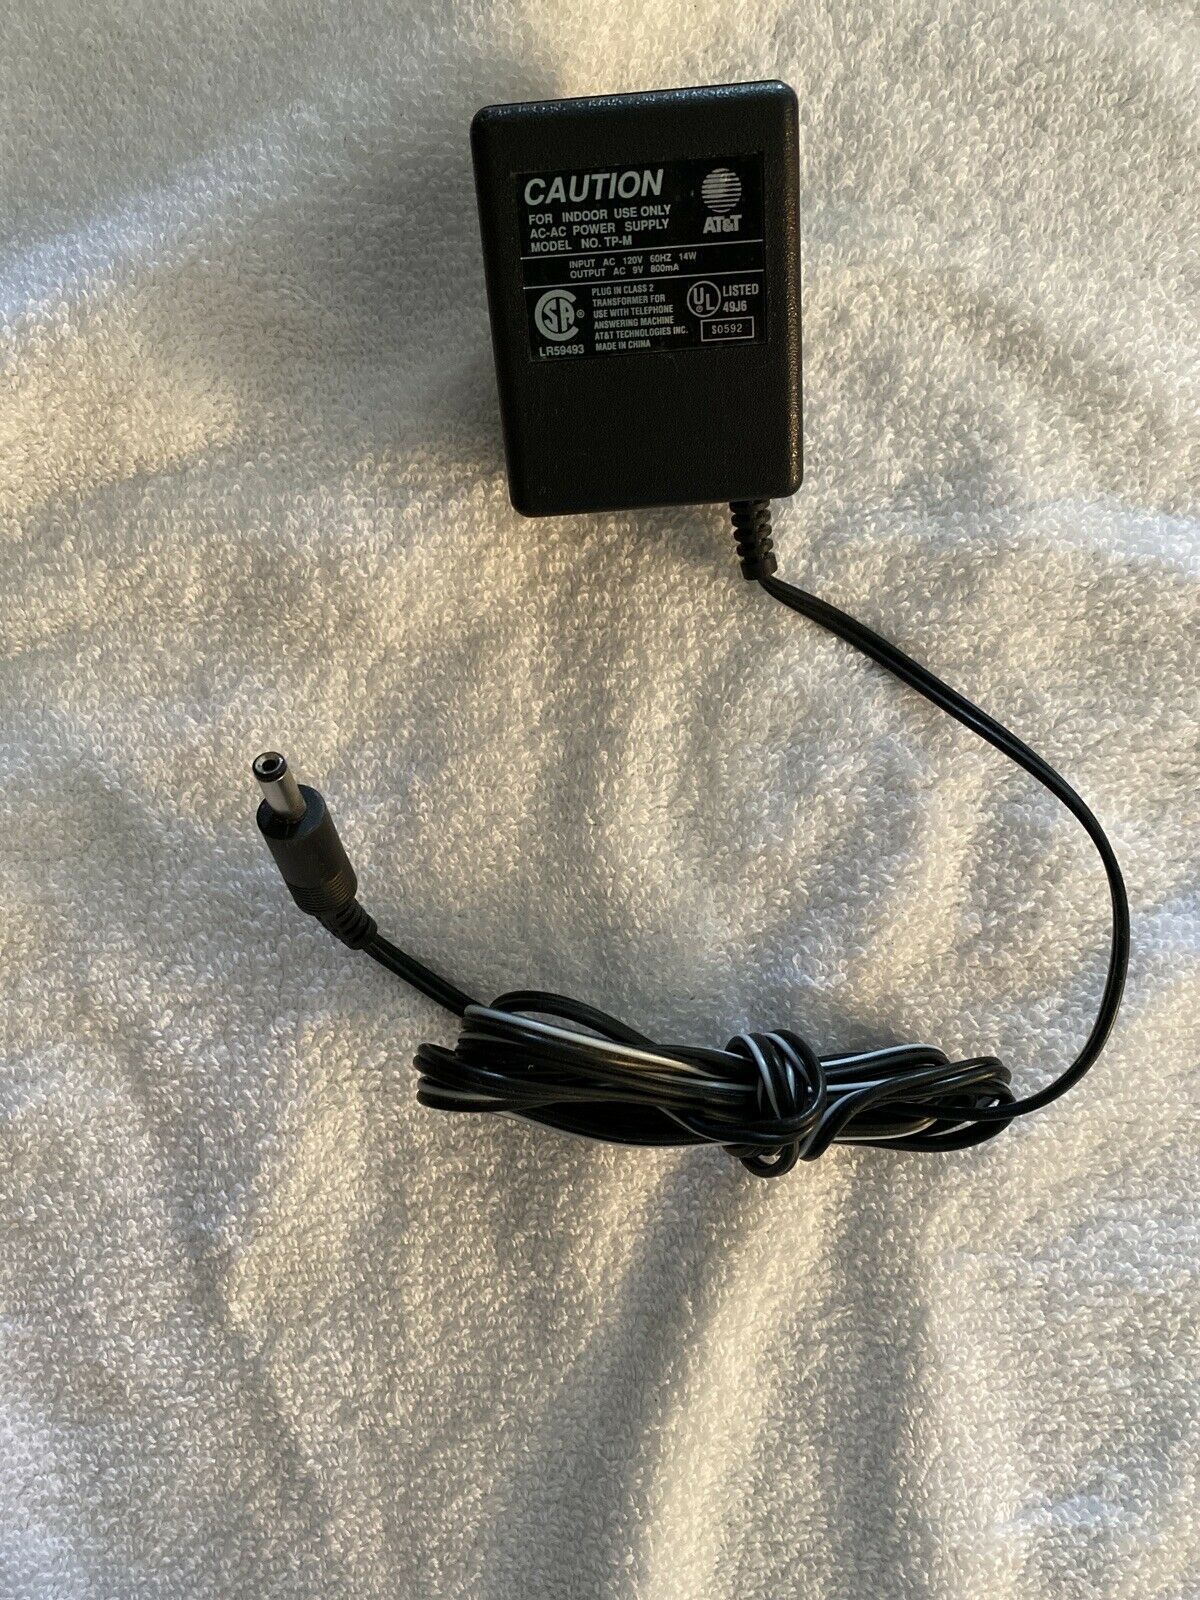 AT&T TP-M AC Adapter Power Supply 9V Type: AC/DC Adapter Output Voltage: 9V Features: Powered AT&T TP-M AC Adap